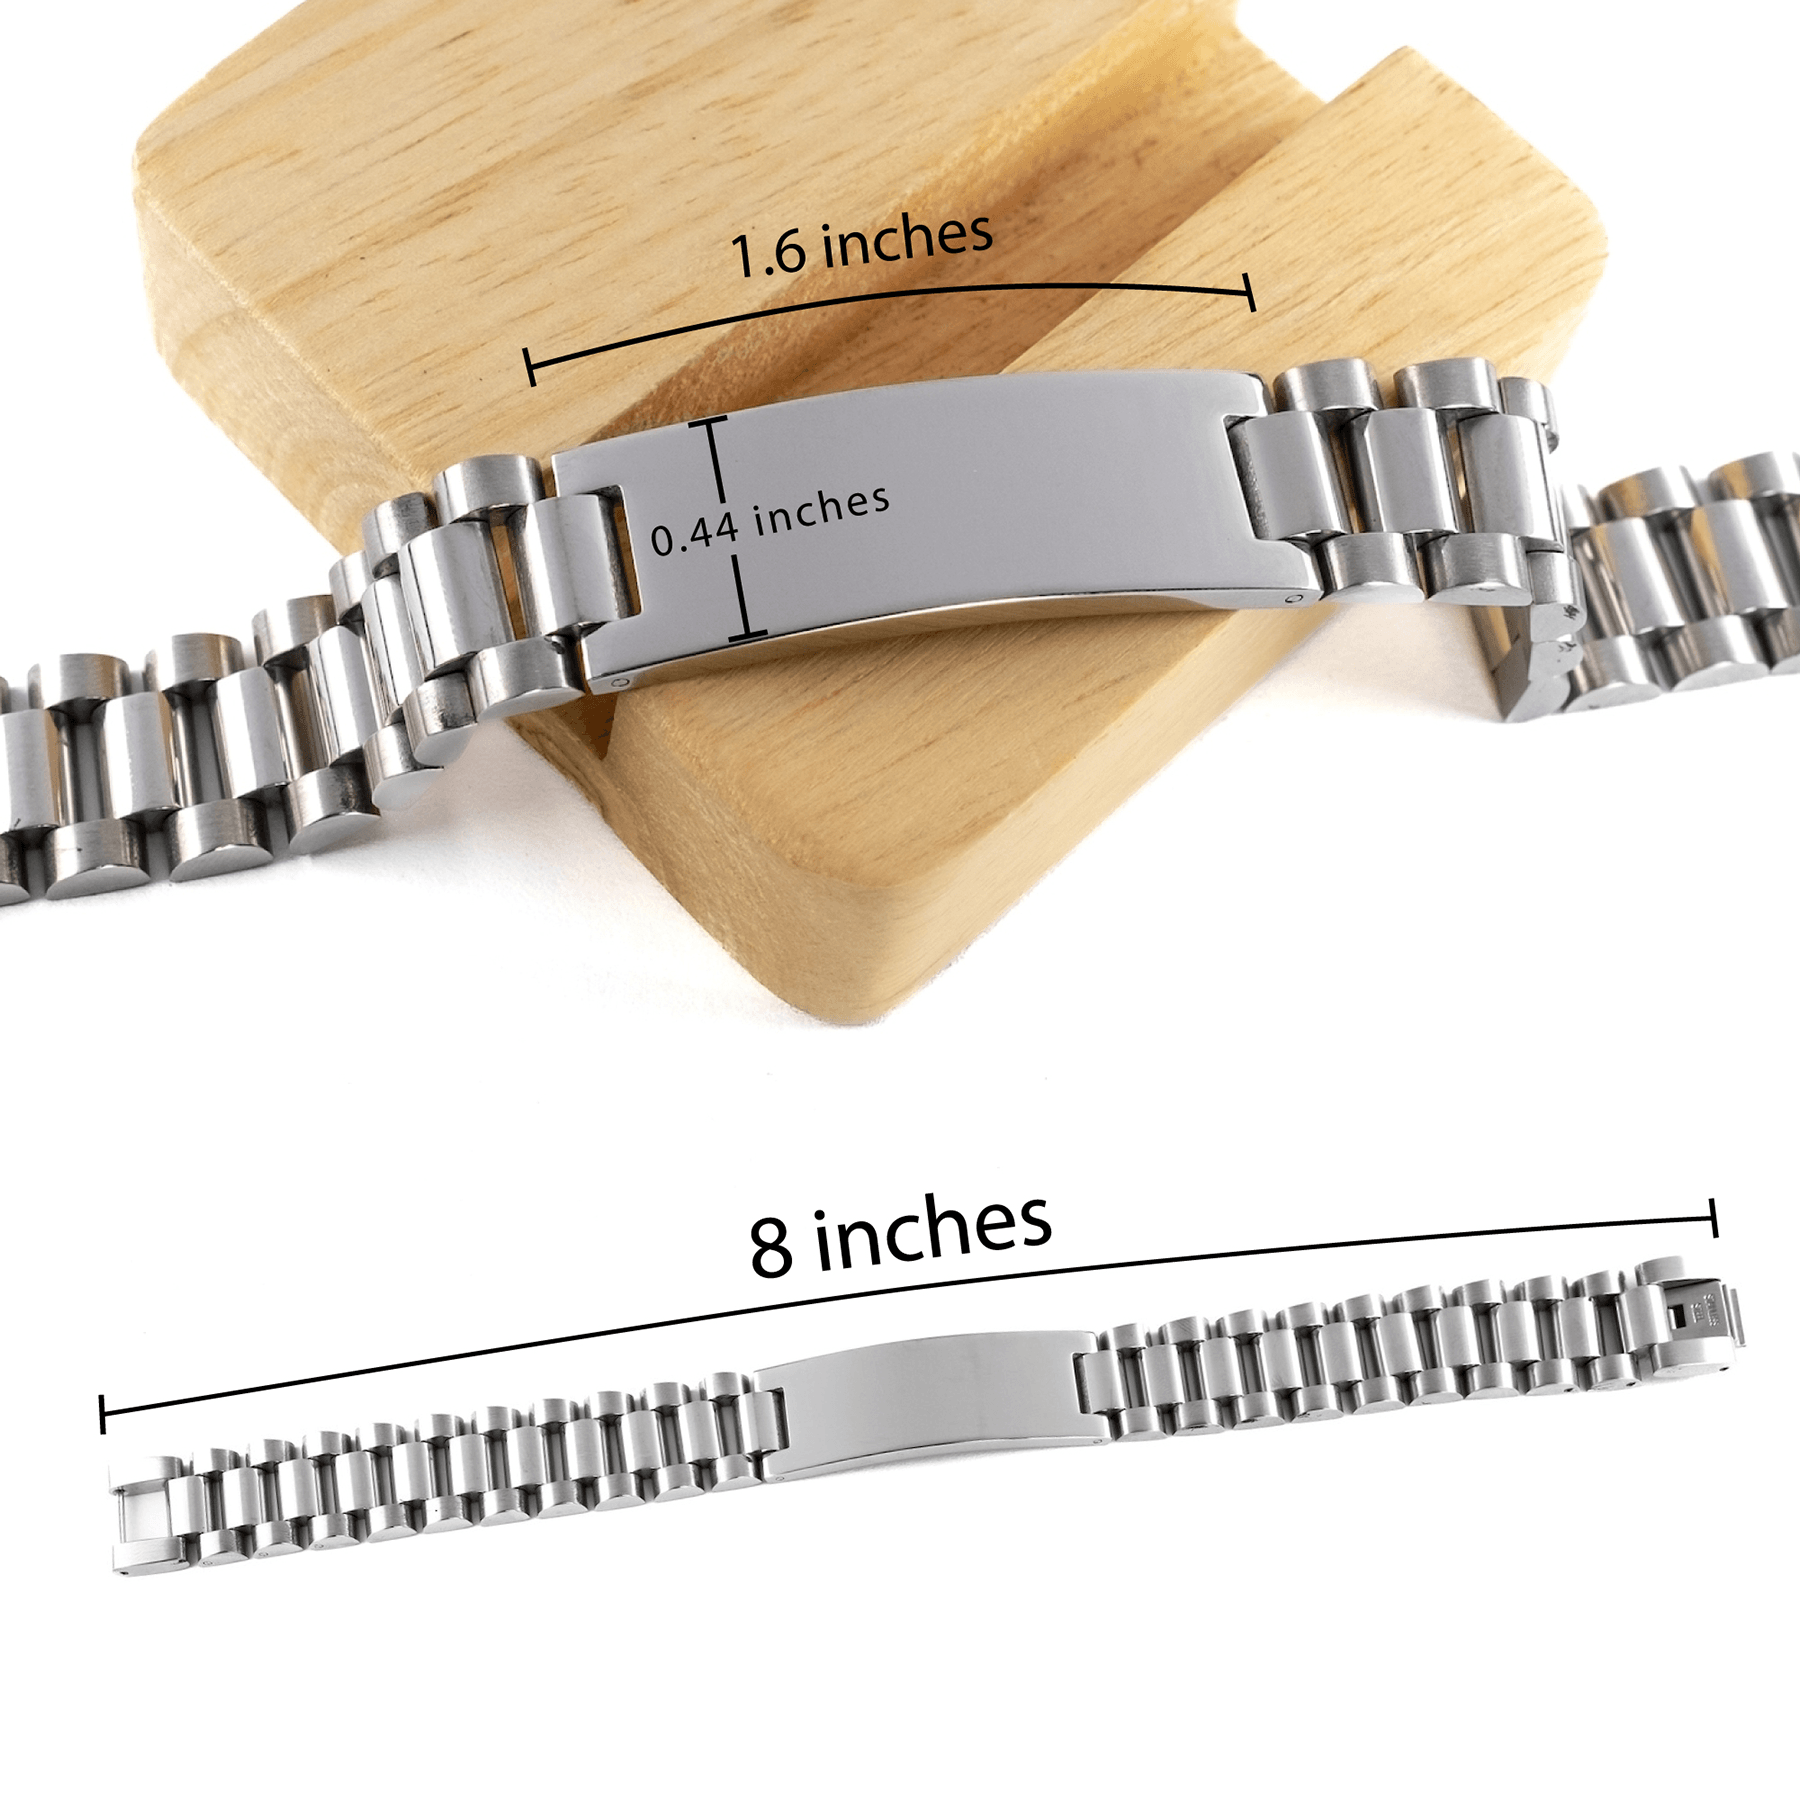 Remarkable Veterinary Assistant Gifts, Your dedication and hard work, Inspirational Birthday Christmas Unique Ladder Stainless Steel Bracelet For Veterinary Assistant, Coworkers, Men, Women, Friends - Mallard Moon Gift Shop